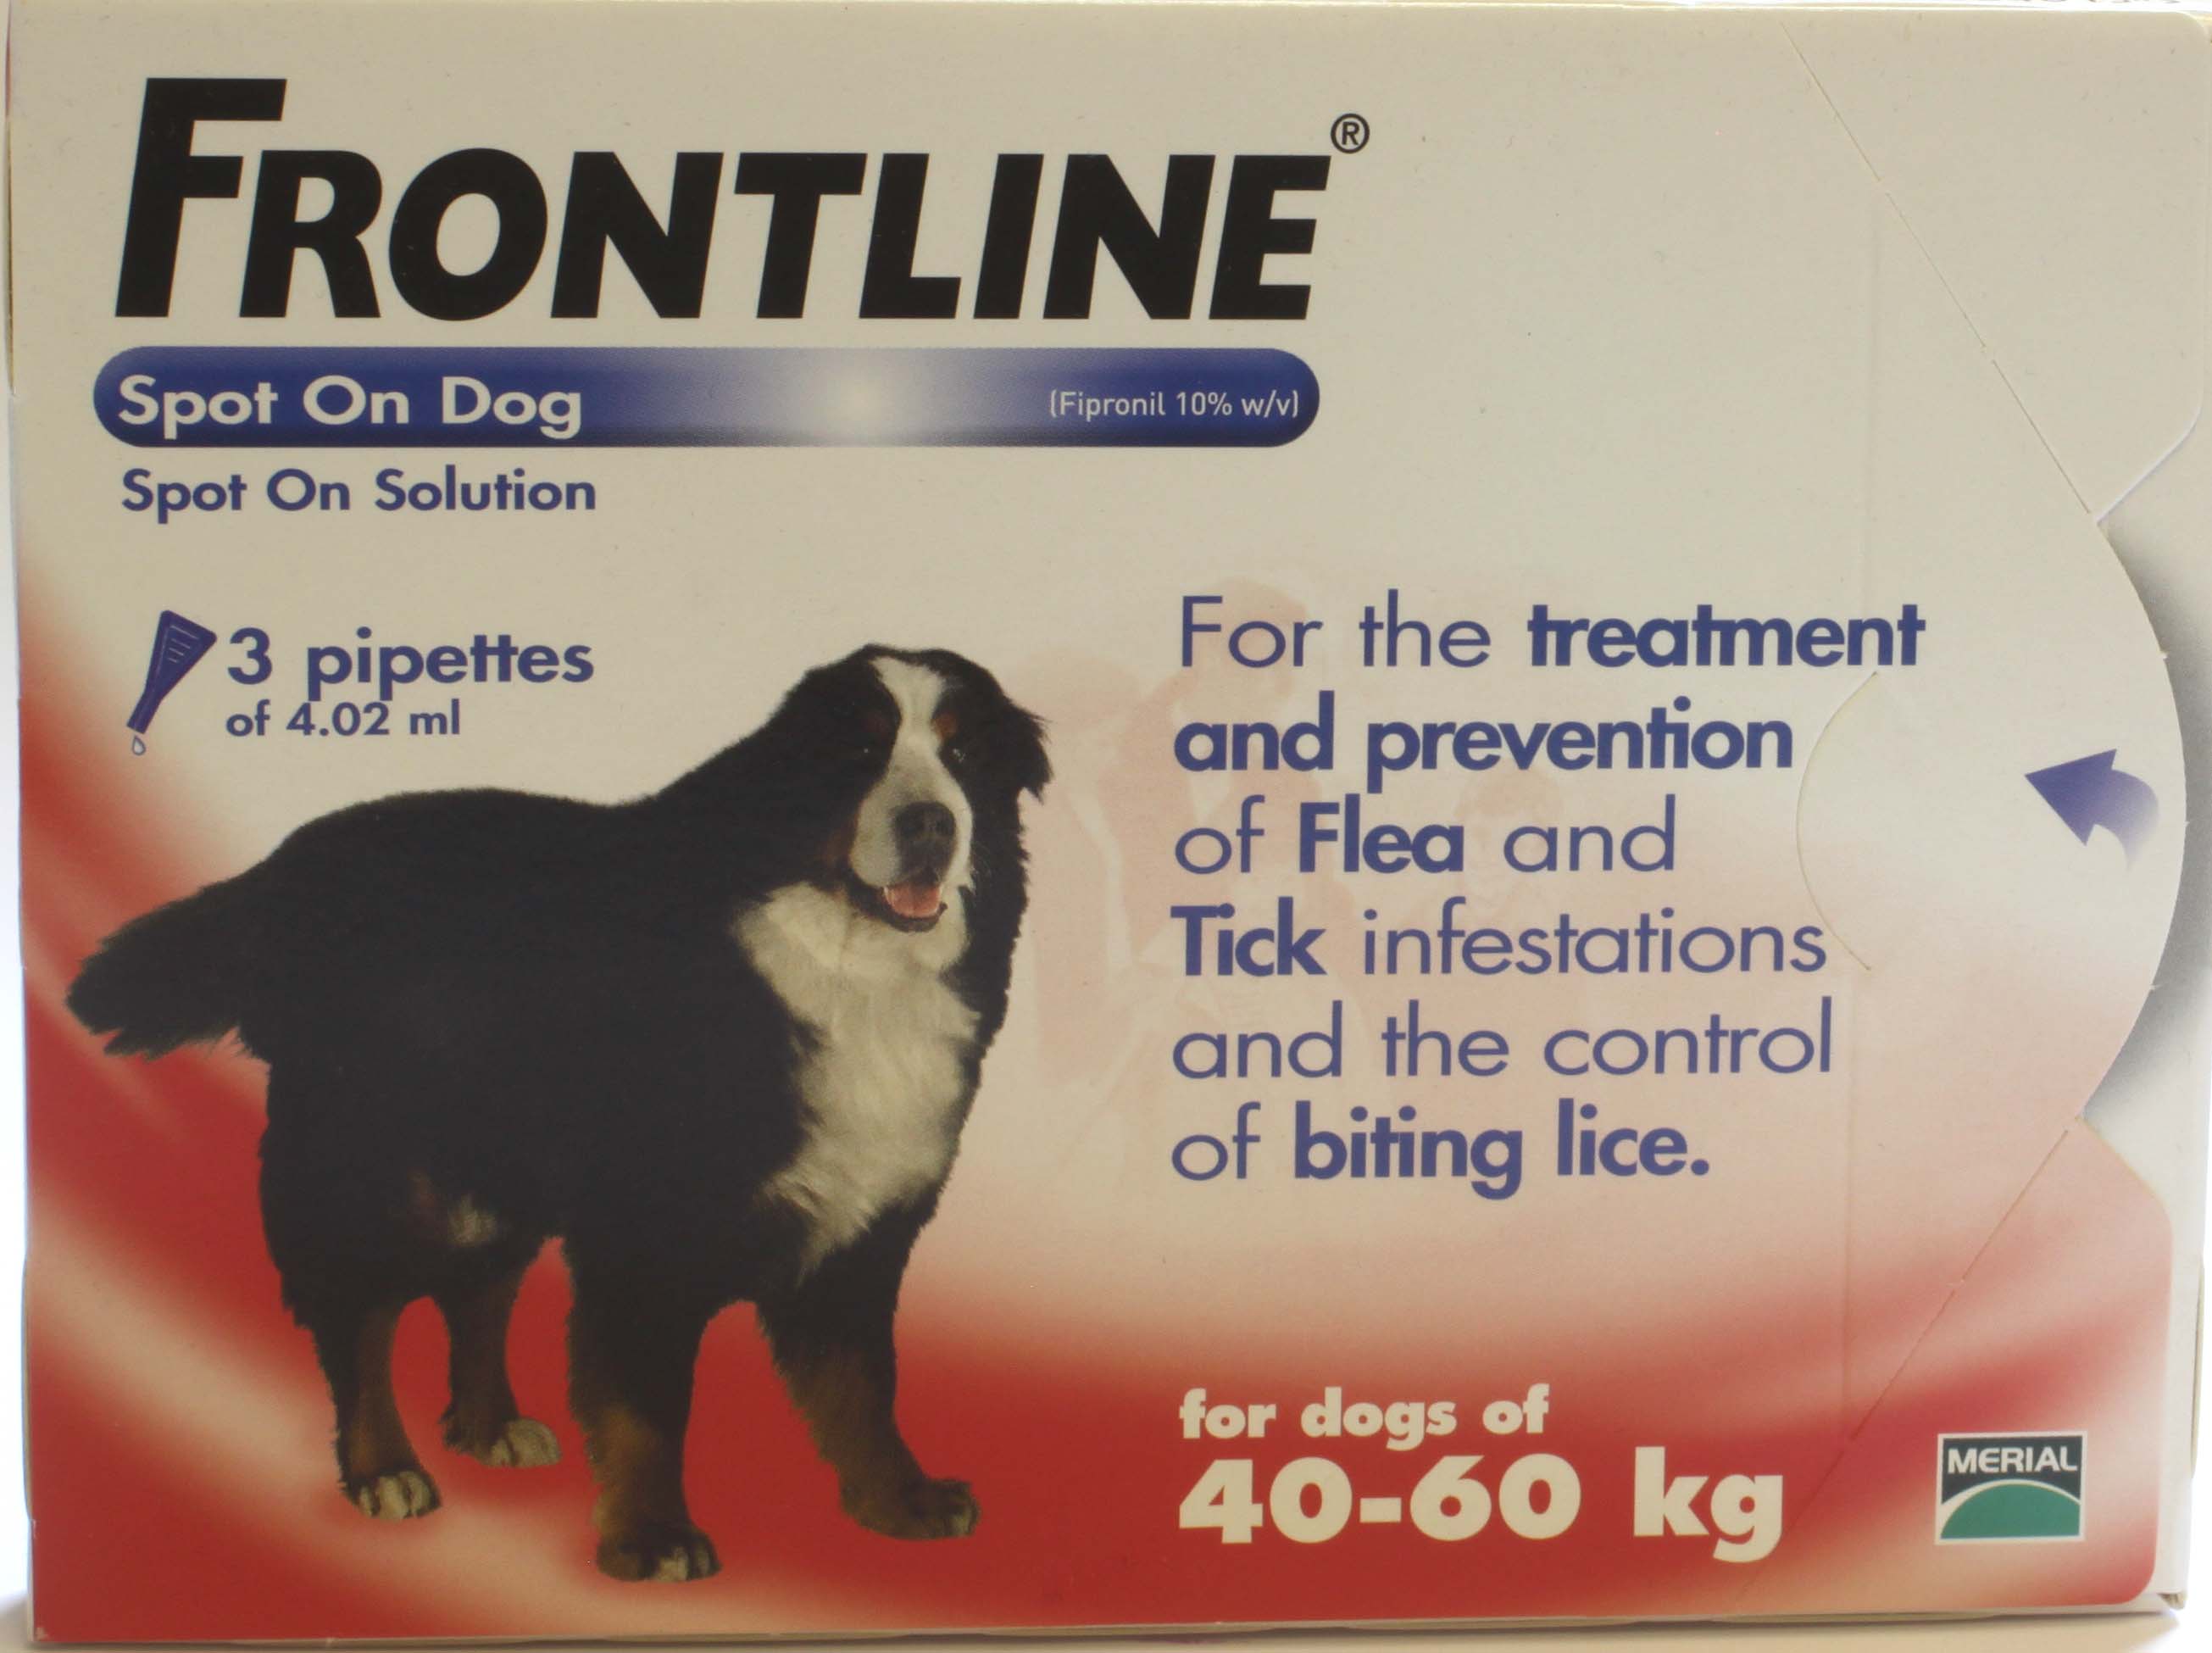 Frontline Spot On Dog Xtra Large Dog - 3 pipettes of 4.02ml